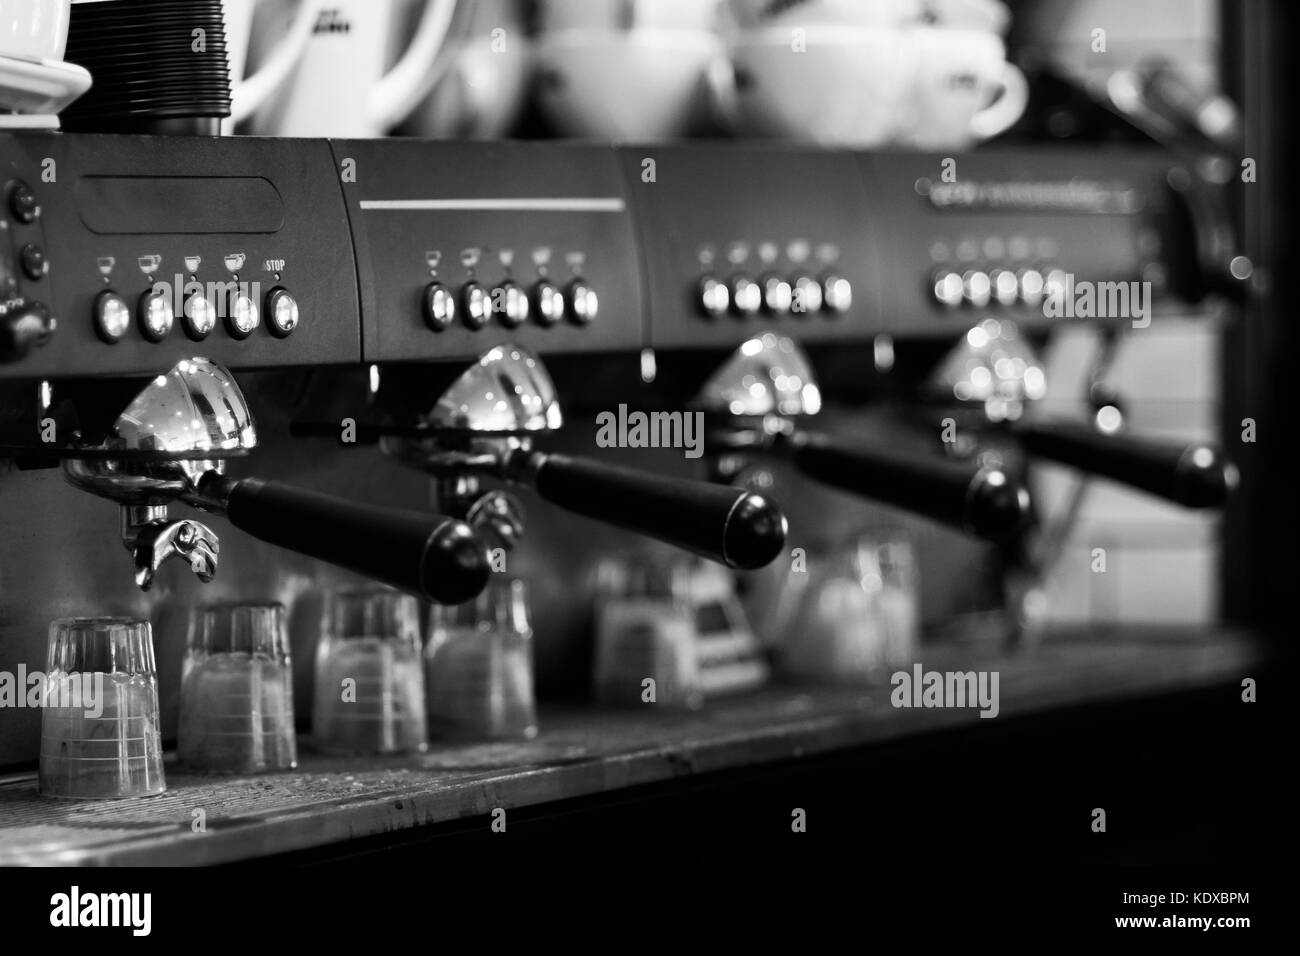 Coffee machines taken in a local cafe in black and white Stock Photo